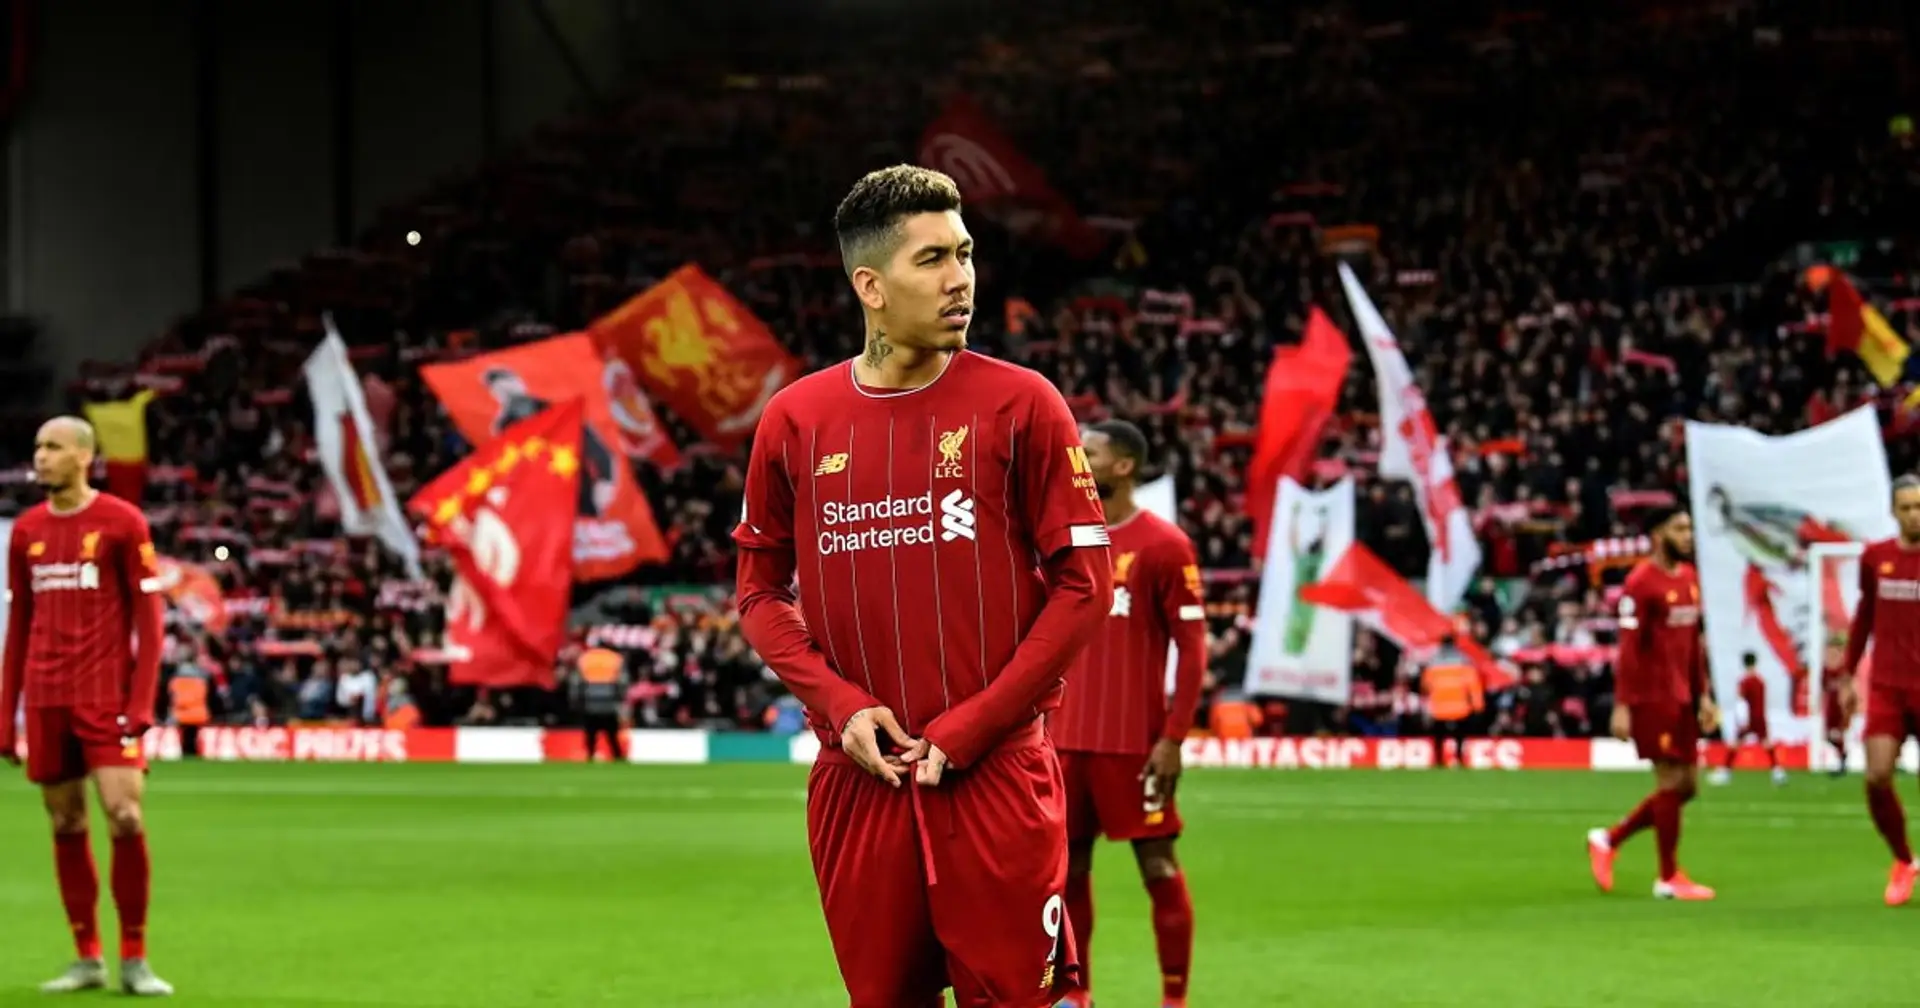 'At Anfield, things are different': Firmino reveals what Brazilians in rival teams said about Anfield